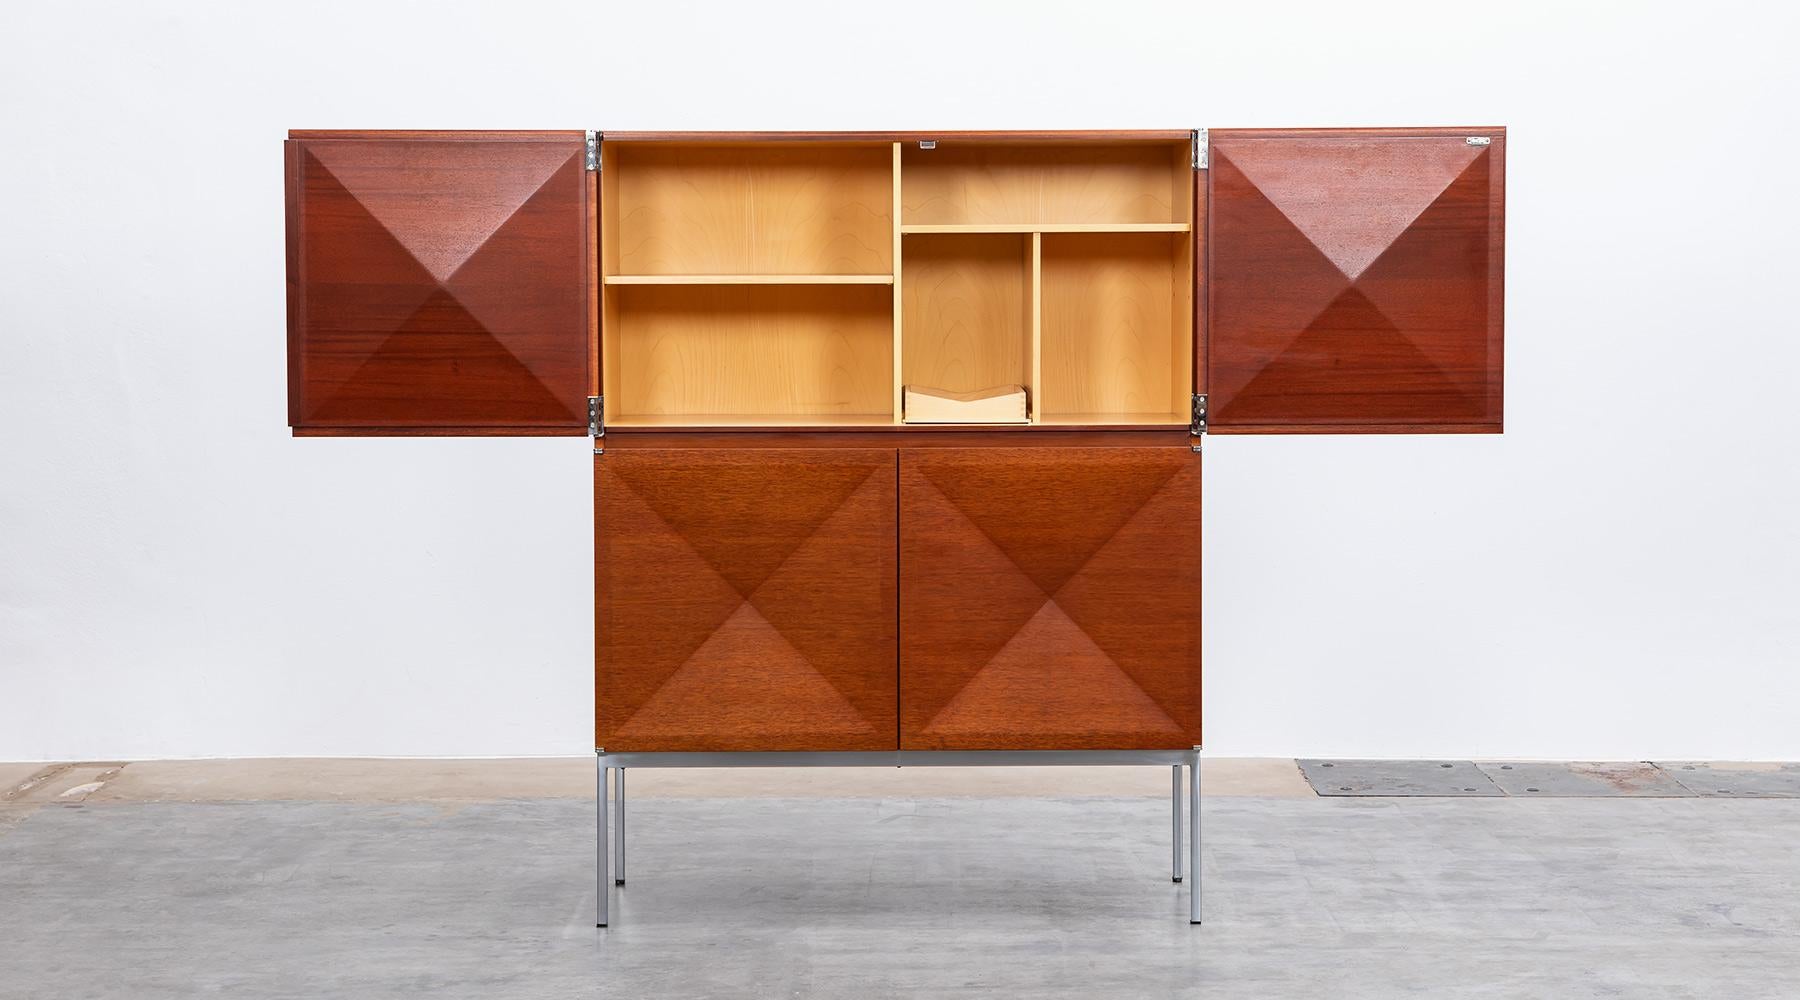 Philippon / Lecoq, Highboard, mahogany, maple, Manufactured by Behr, Germany, 1964.

Highboard with diamond shaped doors designed by Antoine Philippon and Jacqueline Lecoq. Corpus is mahogany and the inlay in maple features a big storage area with